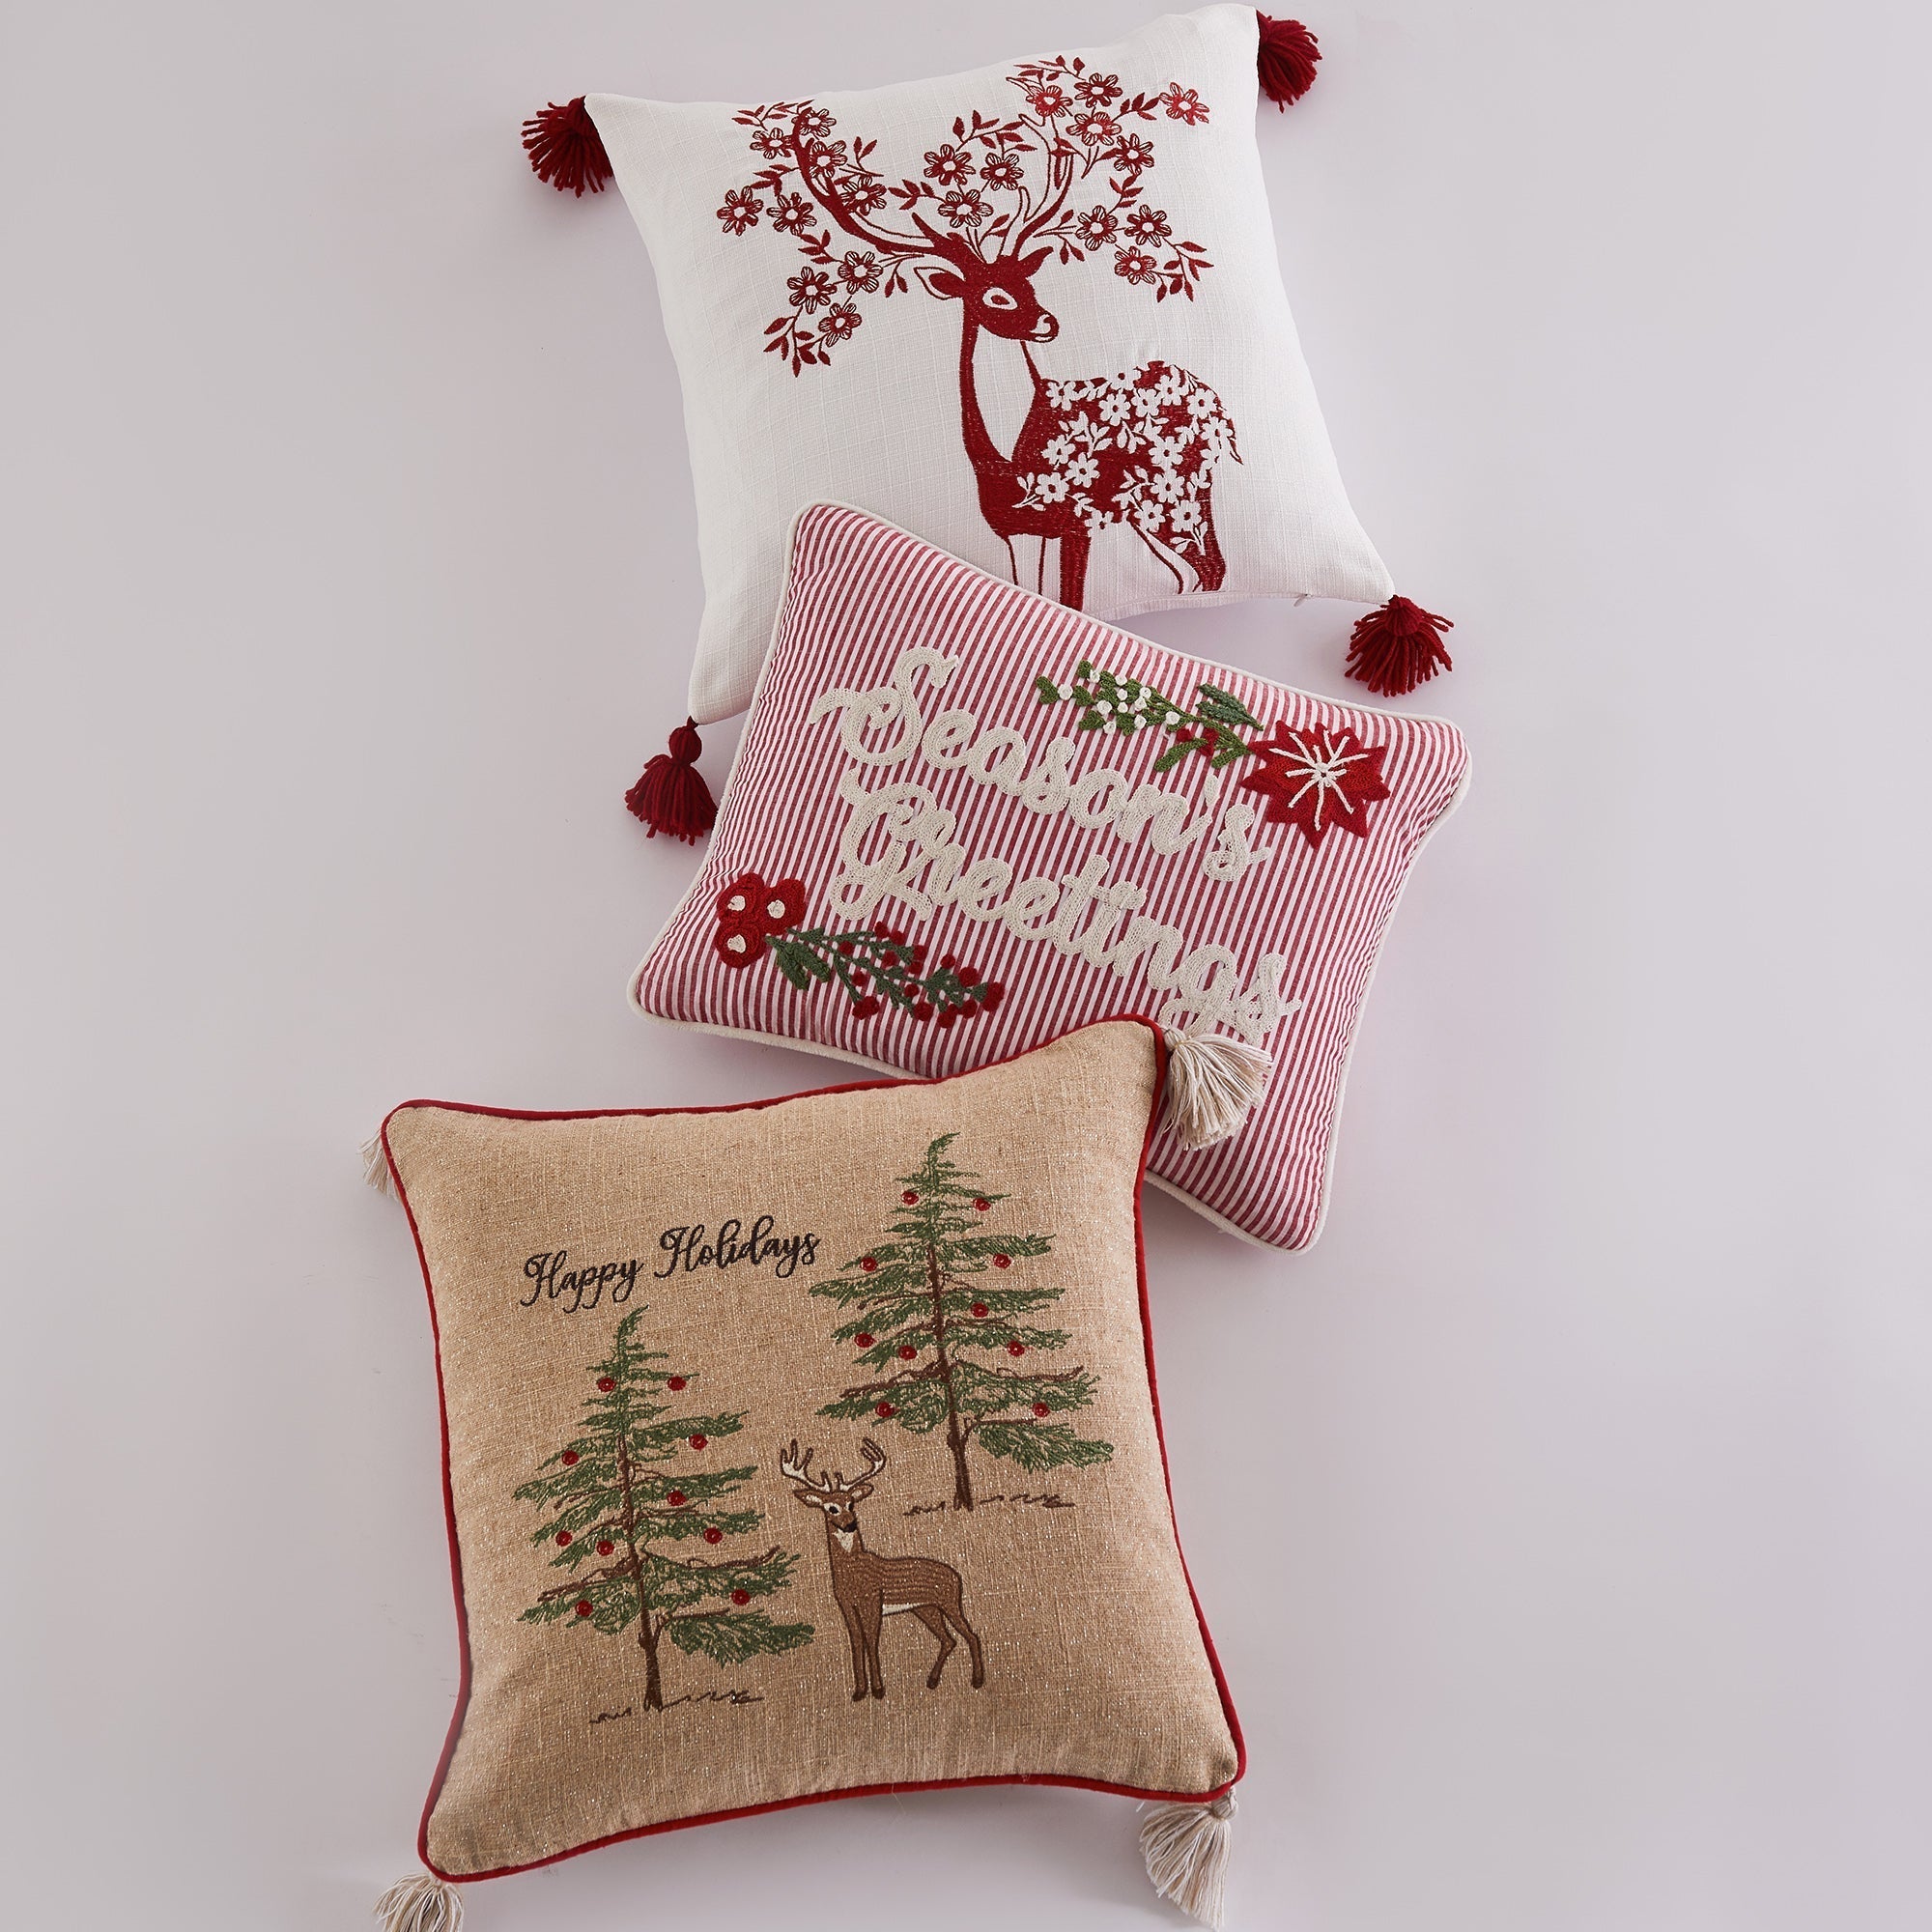 Casement Natural Grateful Thankful Blessed Pillow 18x18 - Accent Pillows -  PINE VALLEY QUILTS